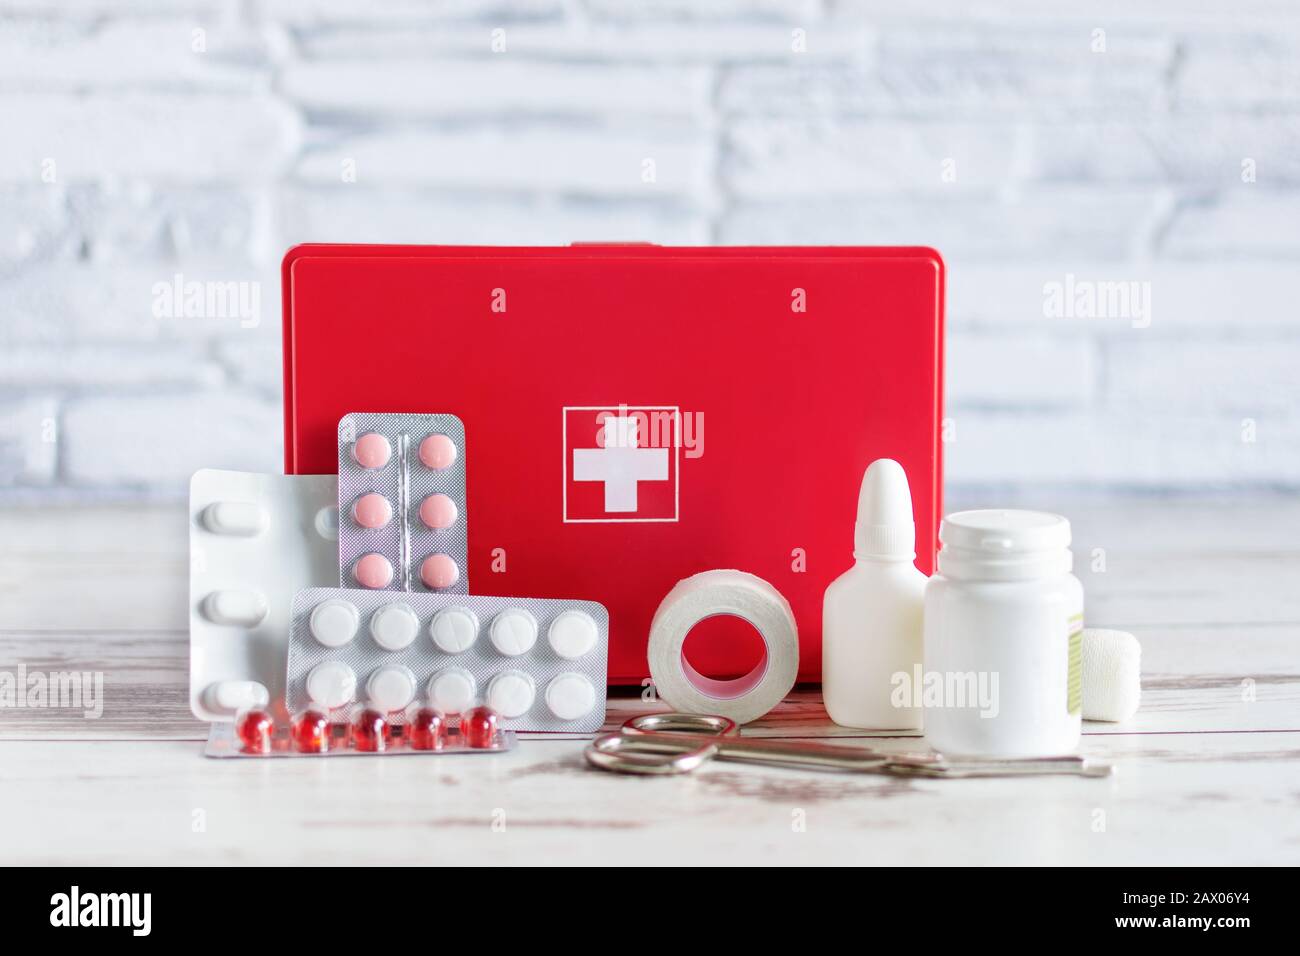 First aid kit red box with medical equipment and medications for emergency on white wooden background over brick wall. Stock Photo